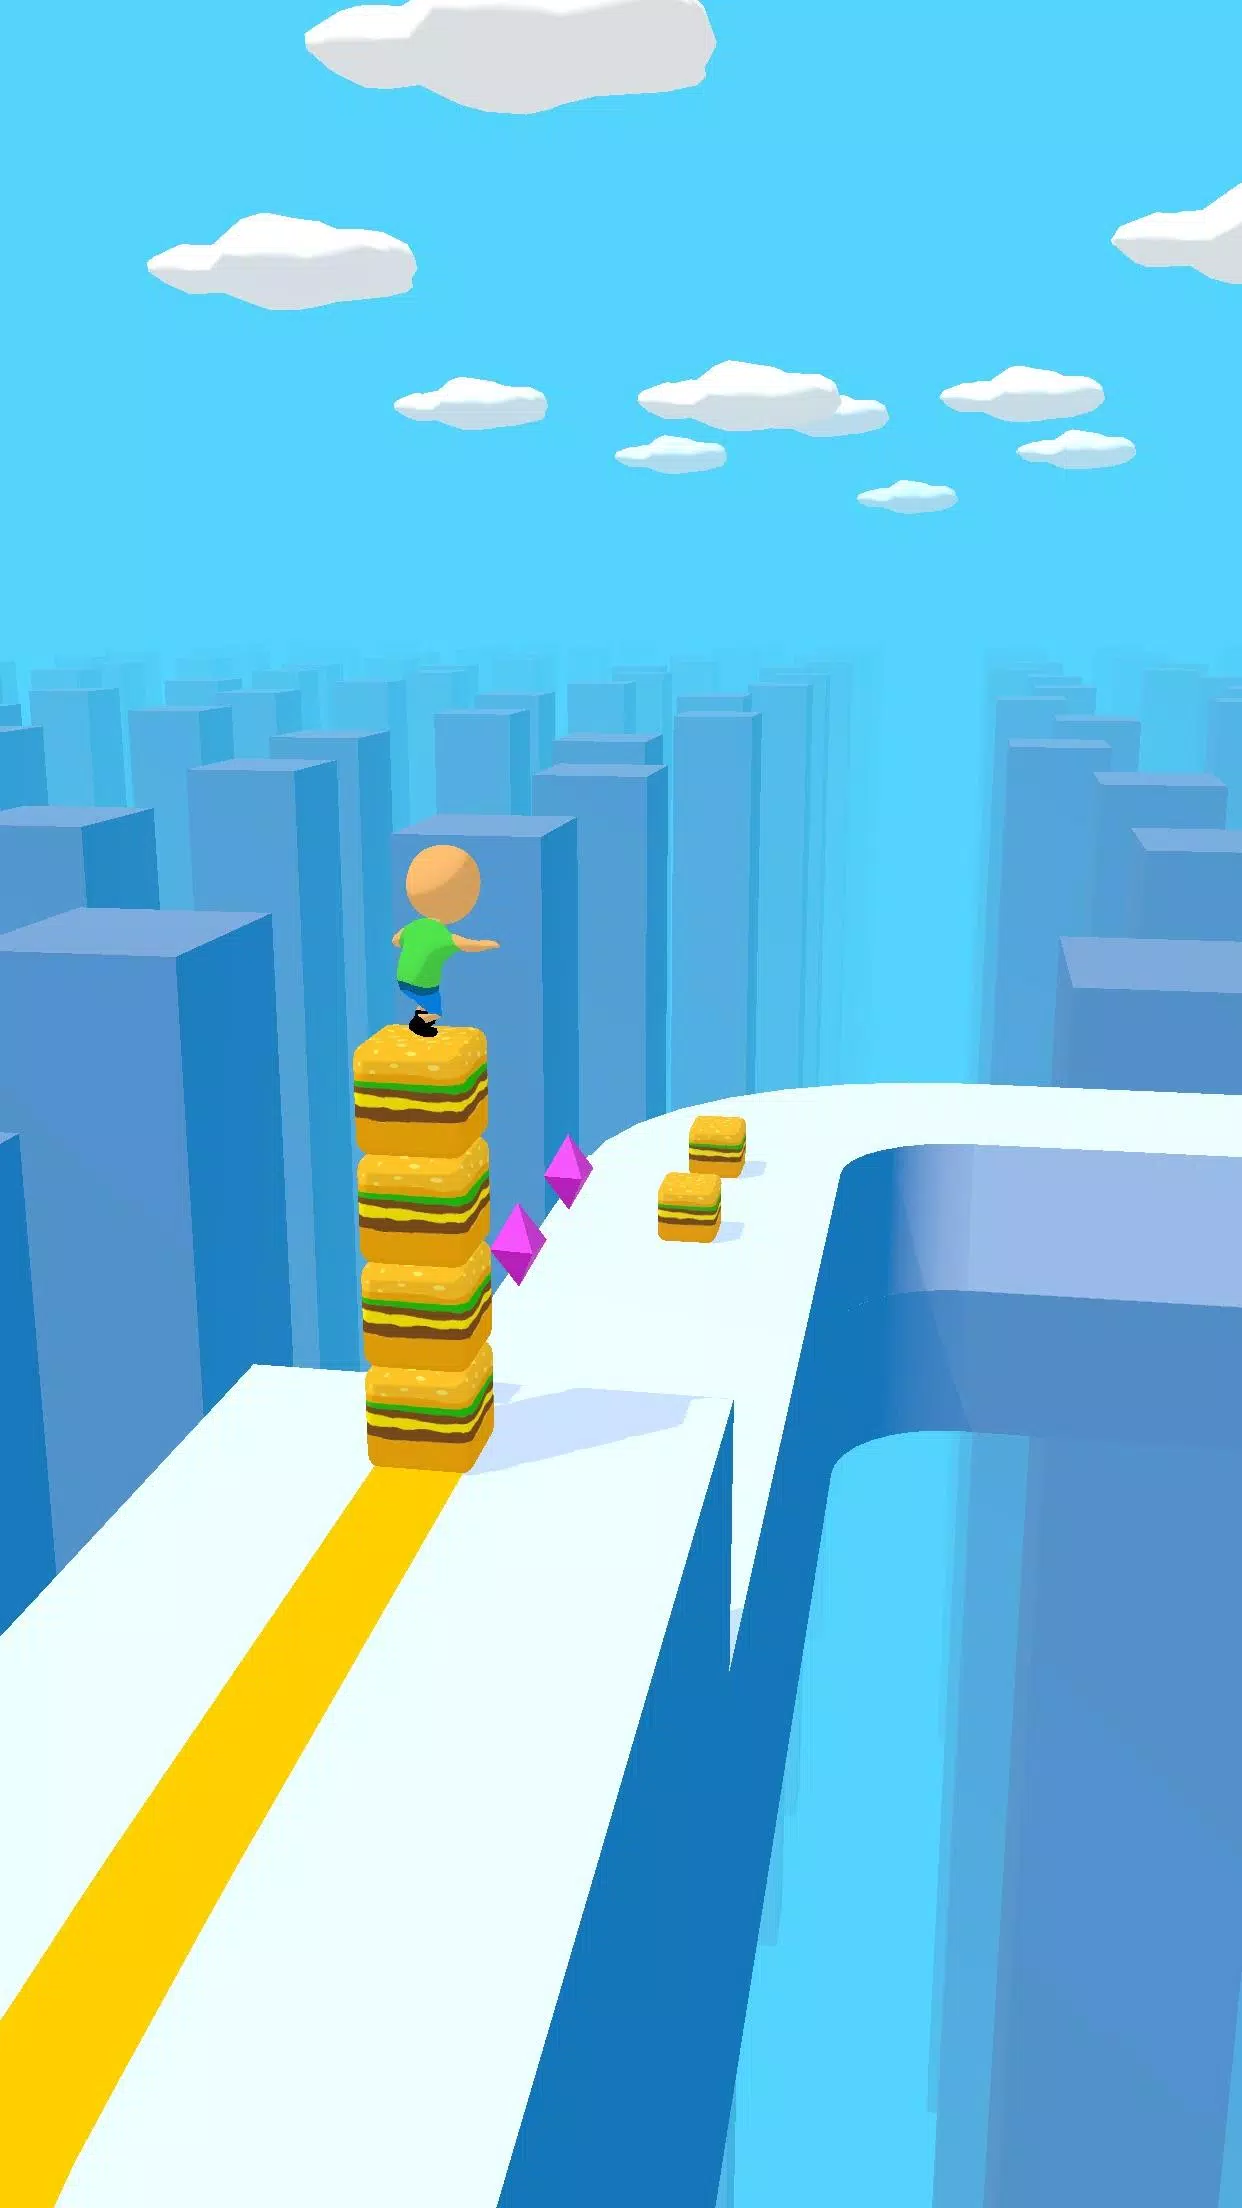 The fact that Cube Surfer has such a diverse array of levels despite its deceptively straightforward gameplay is the primary reason for the game's enormous popularity